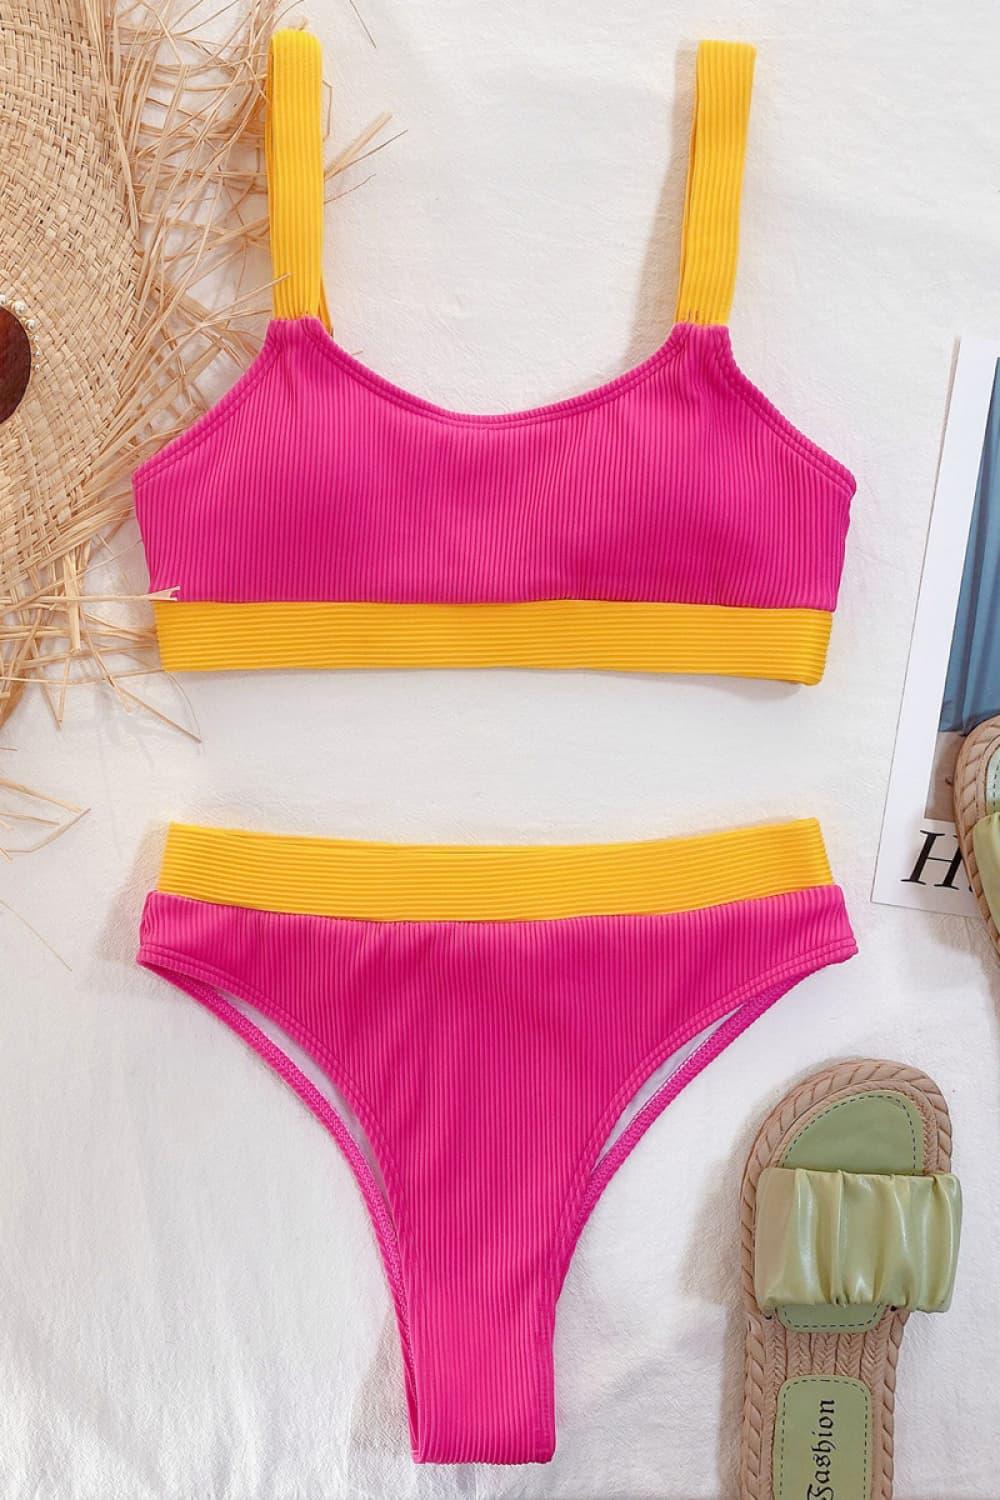 a pink and yellow swimsuit next to a straw hat